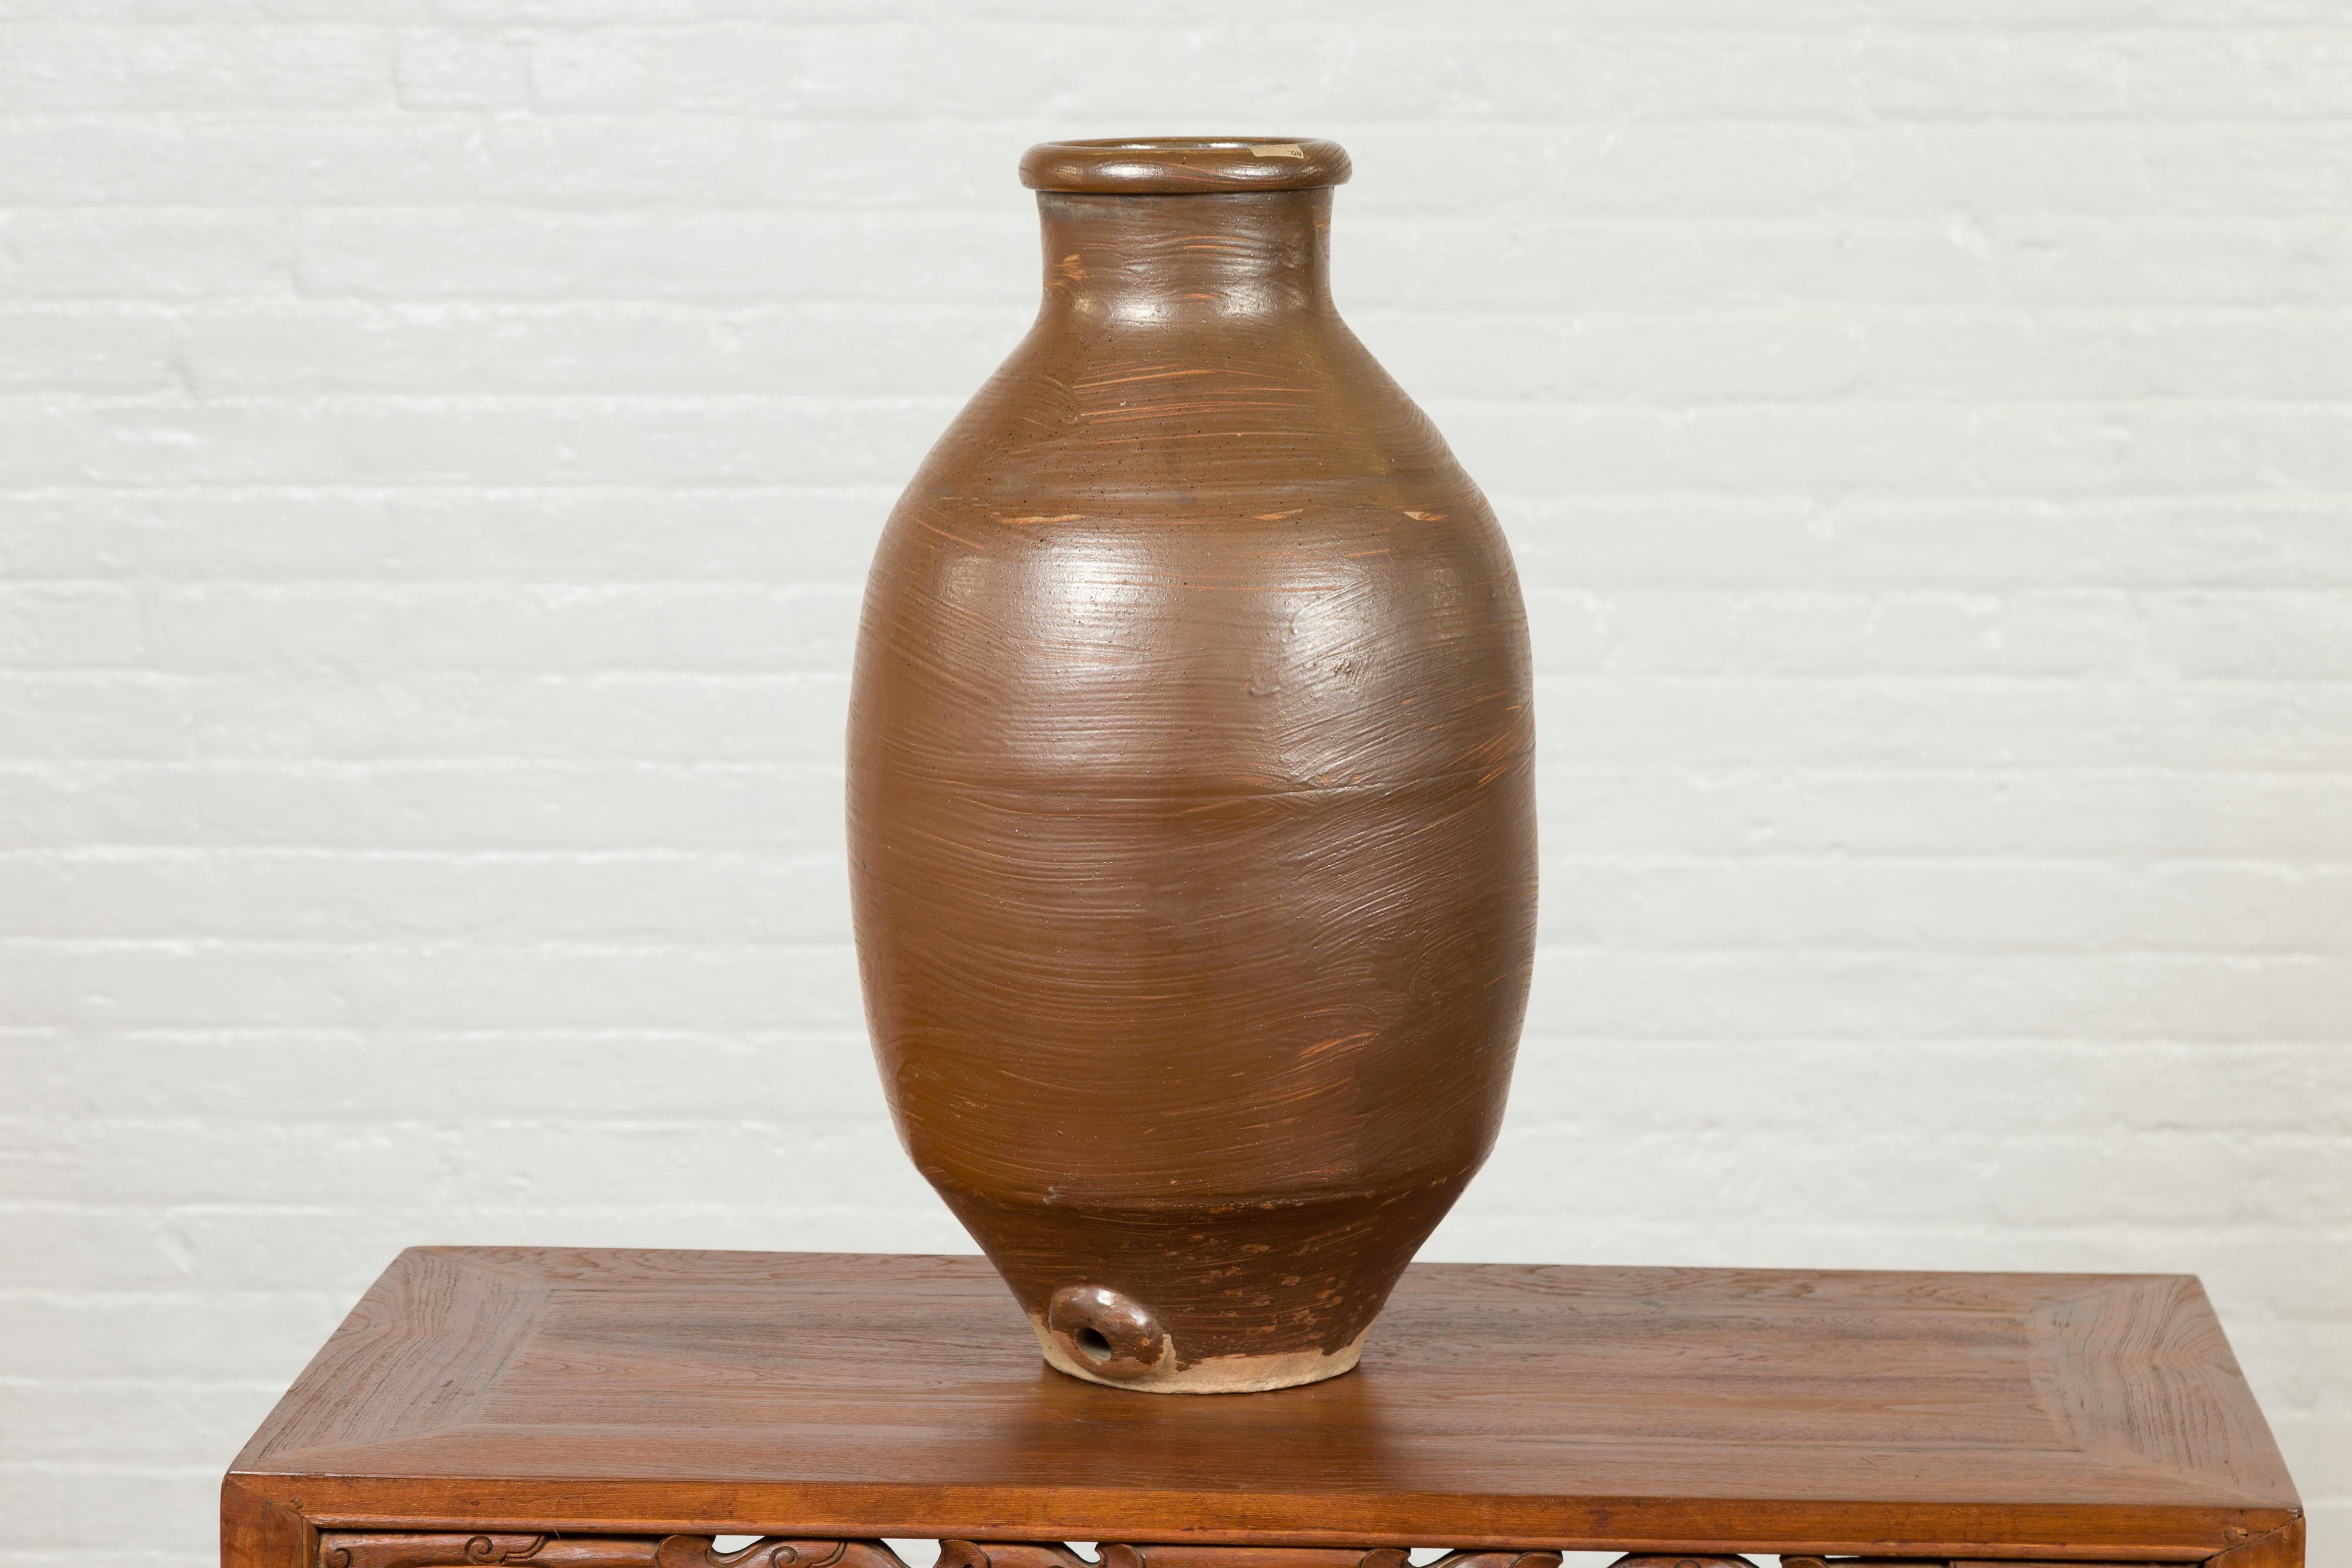 Japanese Meiji Period 19th century Water Jar with Brown Monochrome Patina For Sale 6